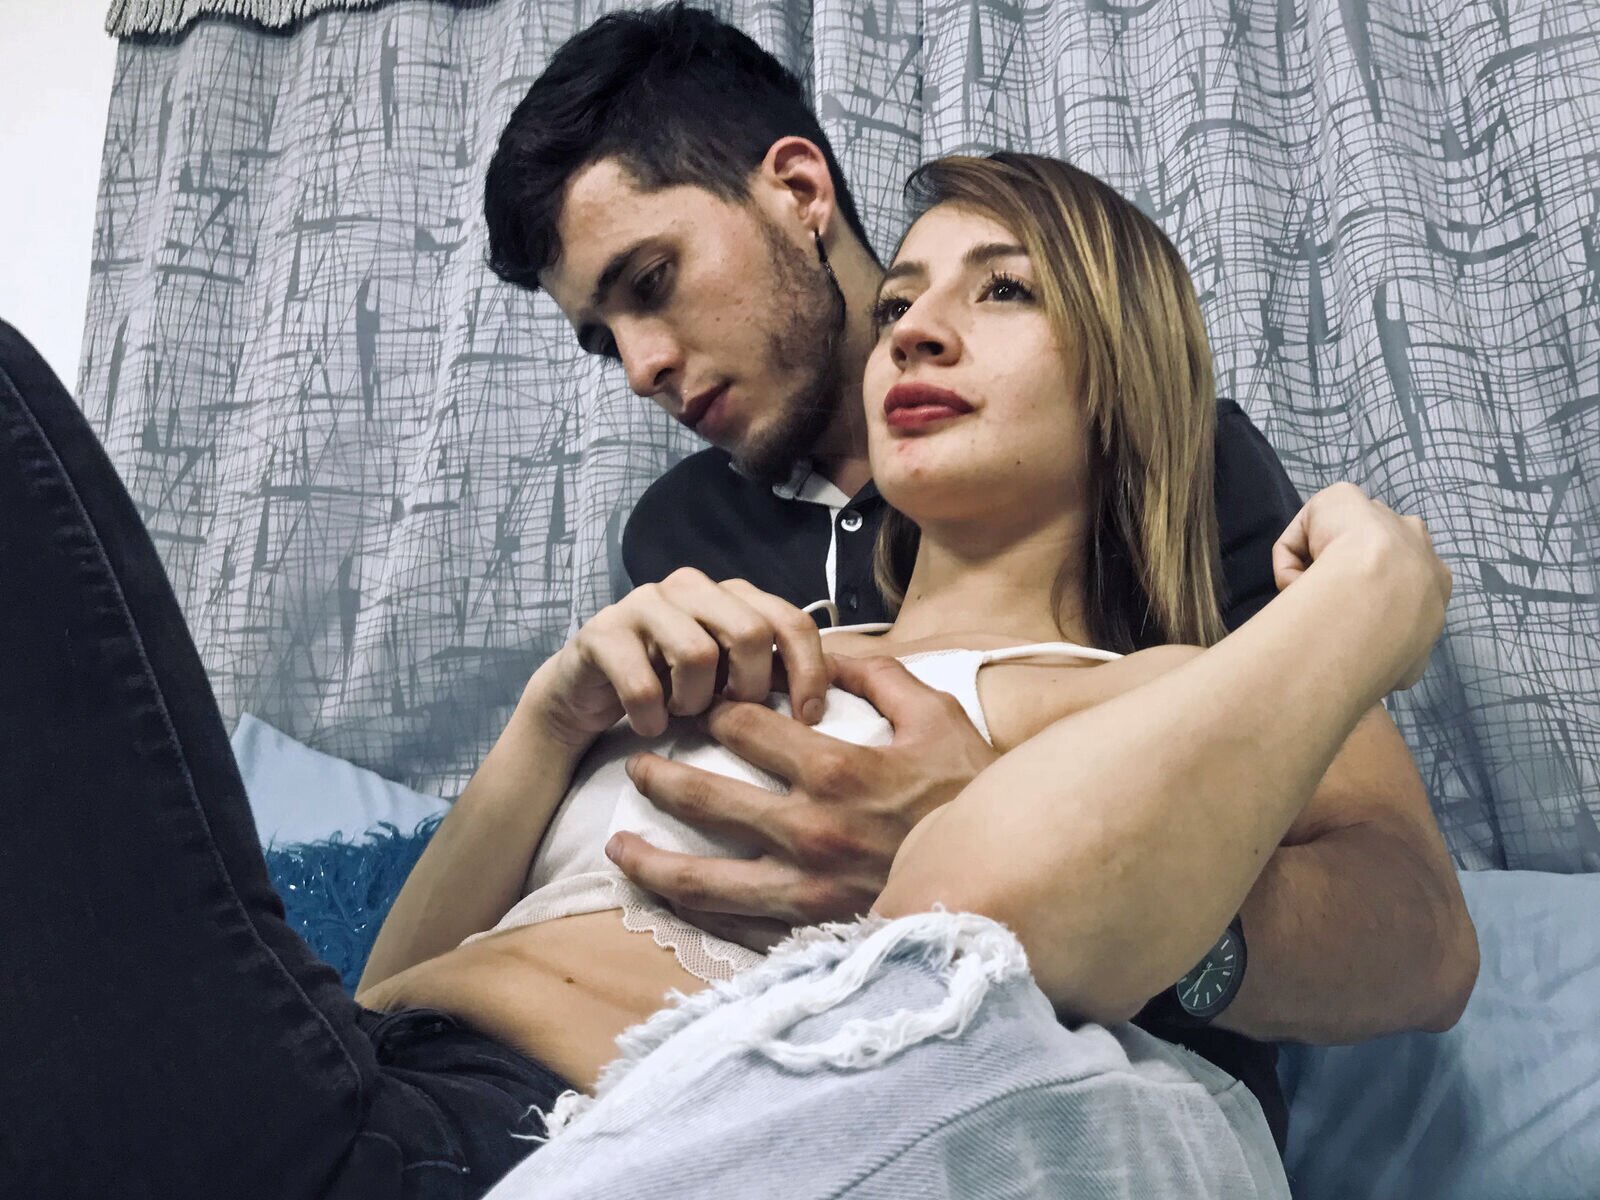 Free Live Sex Chat With KatyandRyan